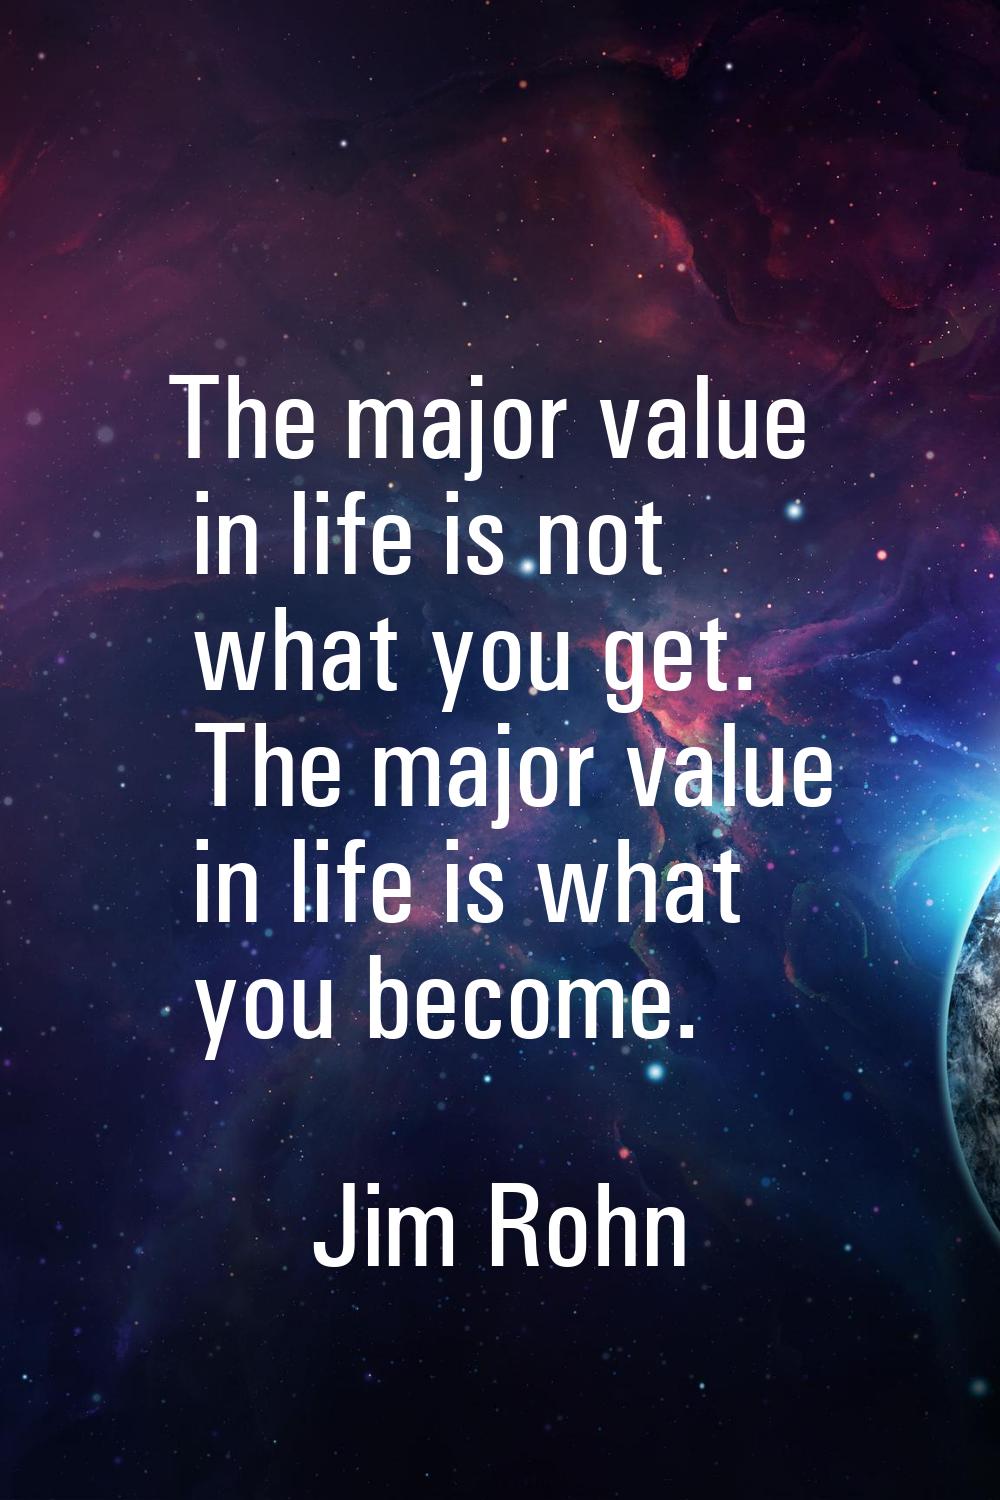 The major value in life is not what you get. The major value in life is what you become.